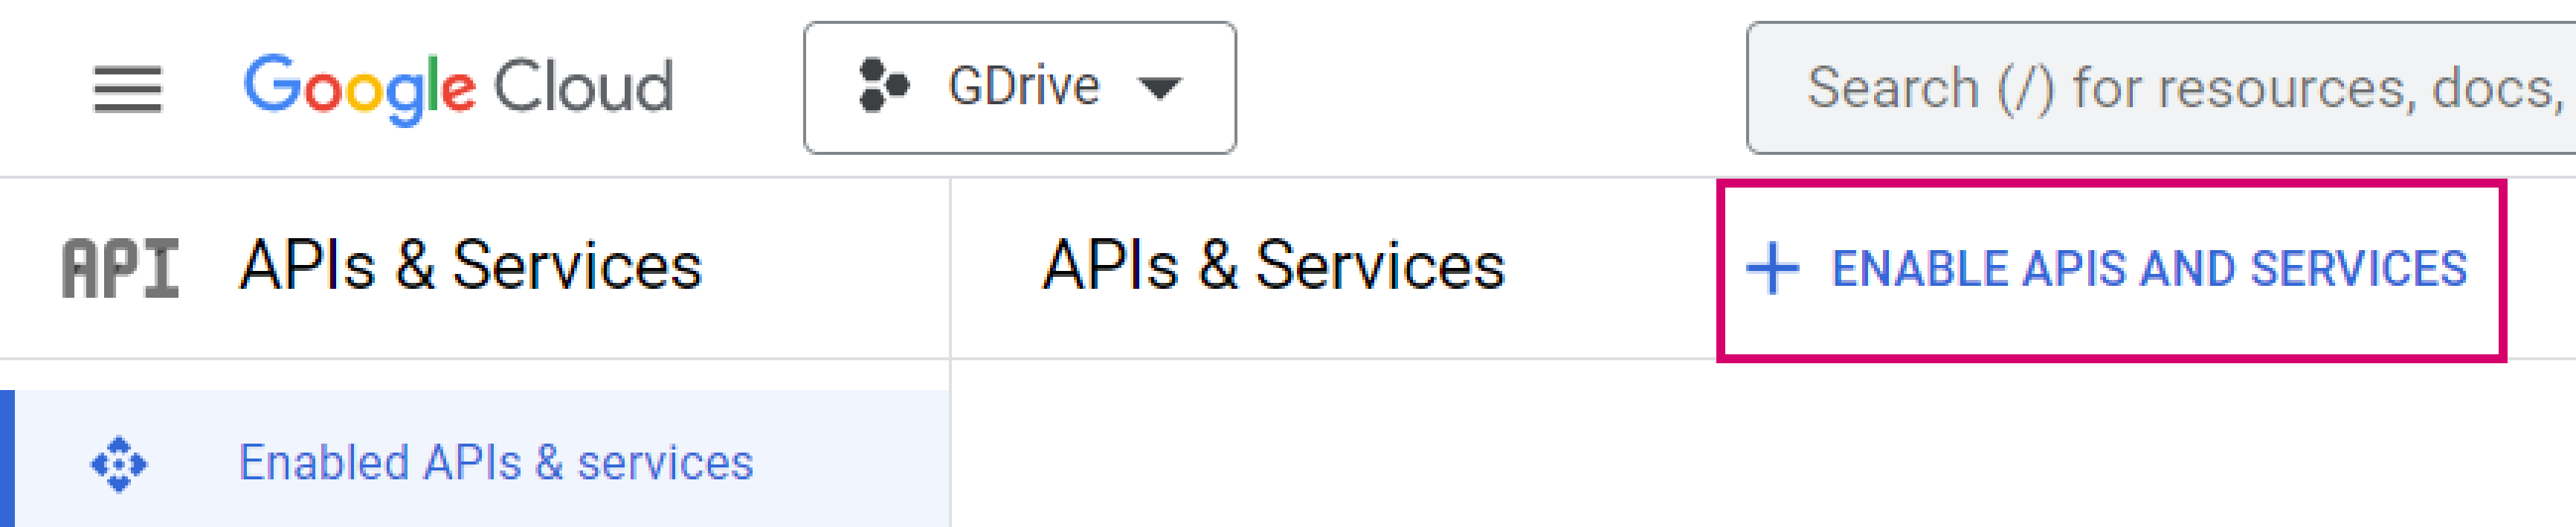 Enable APIs and services